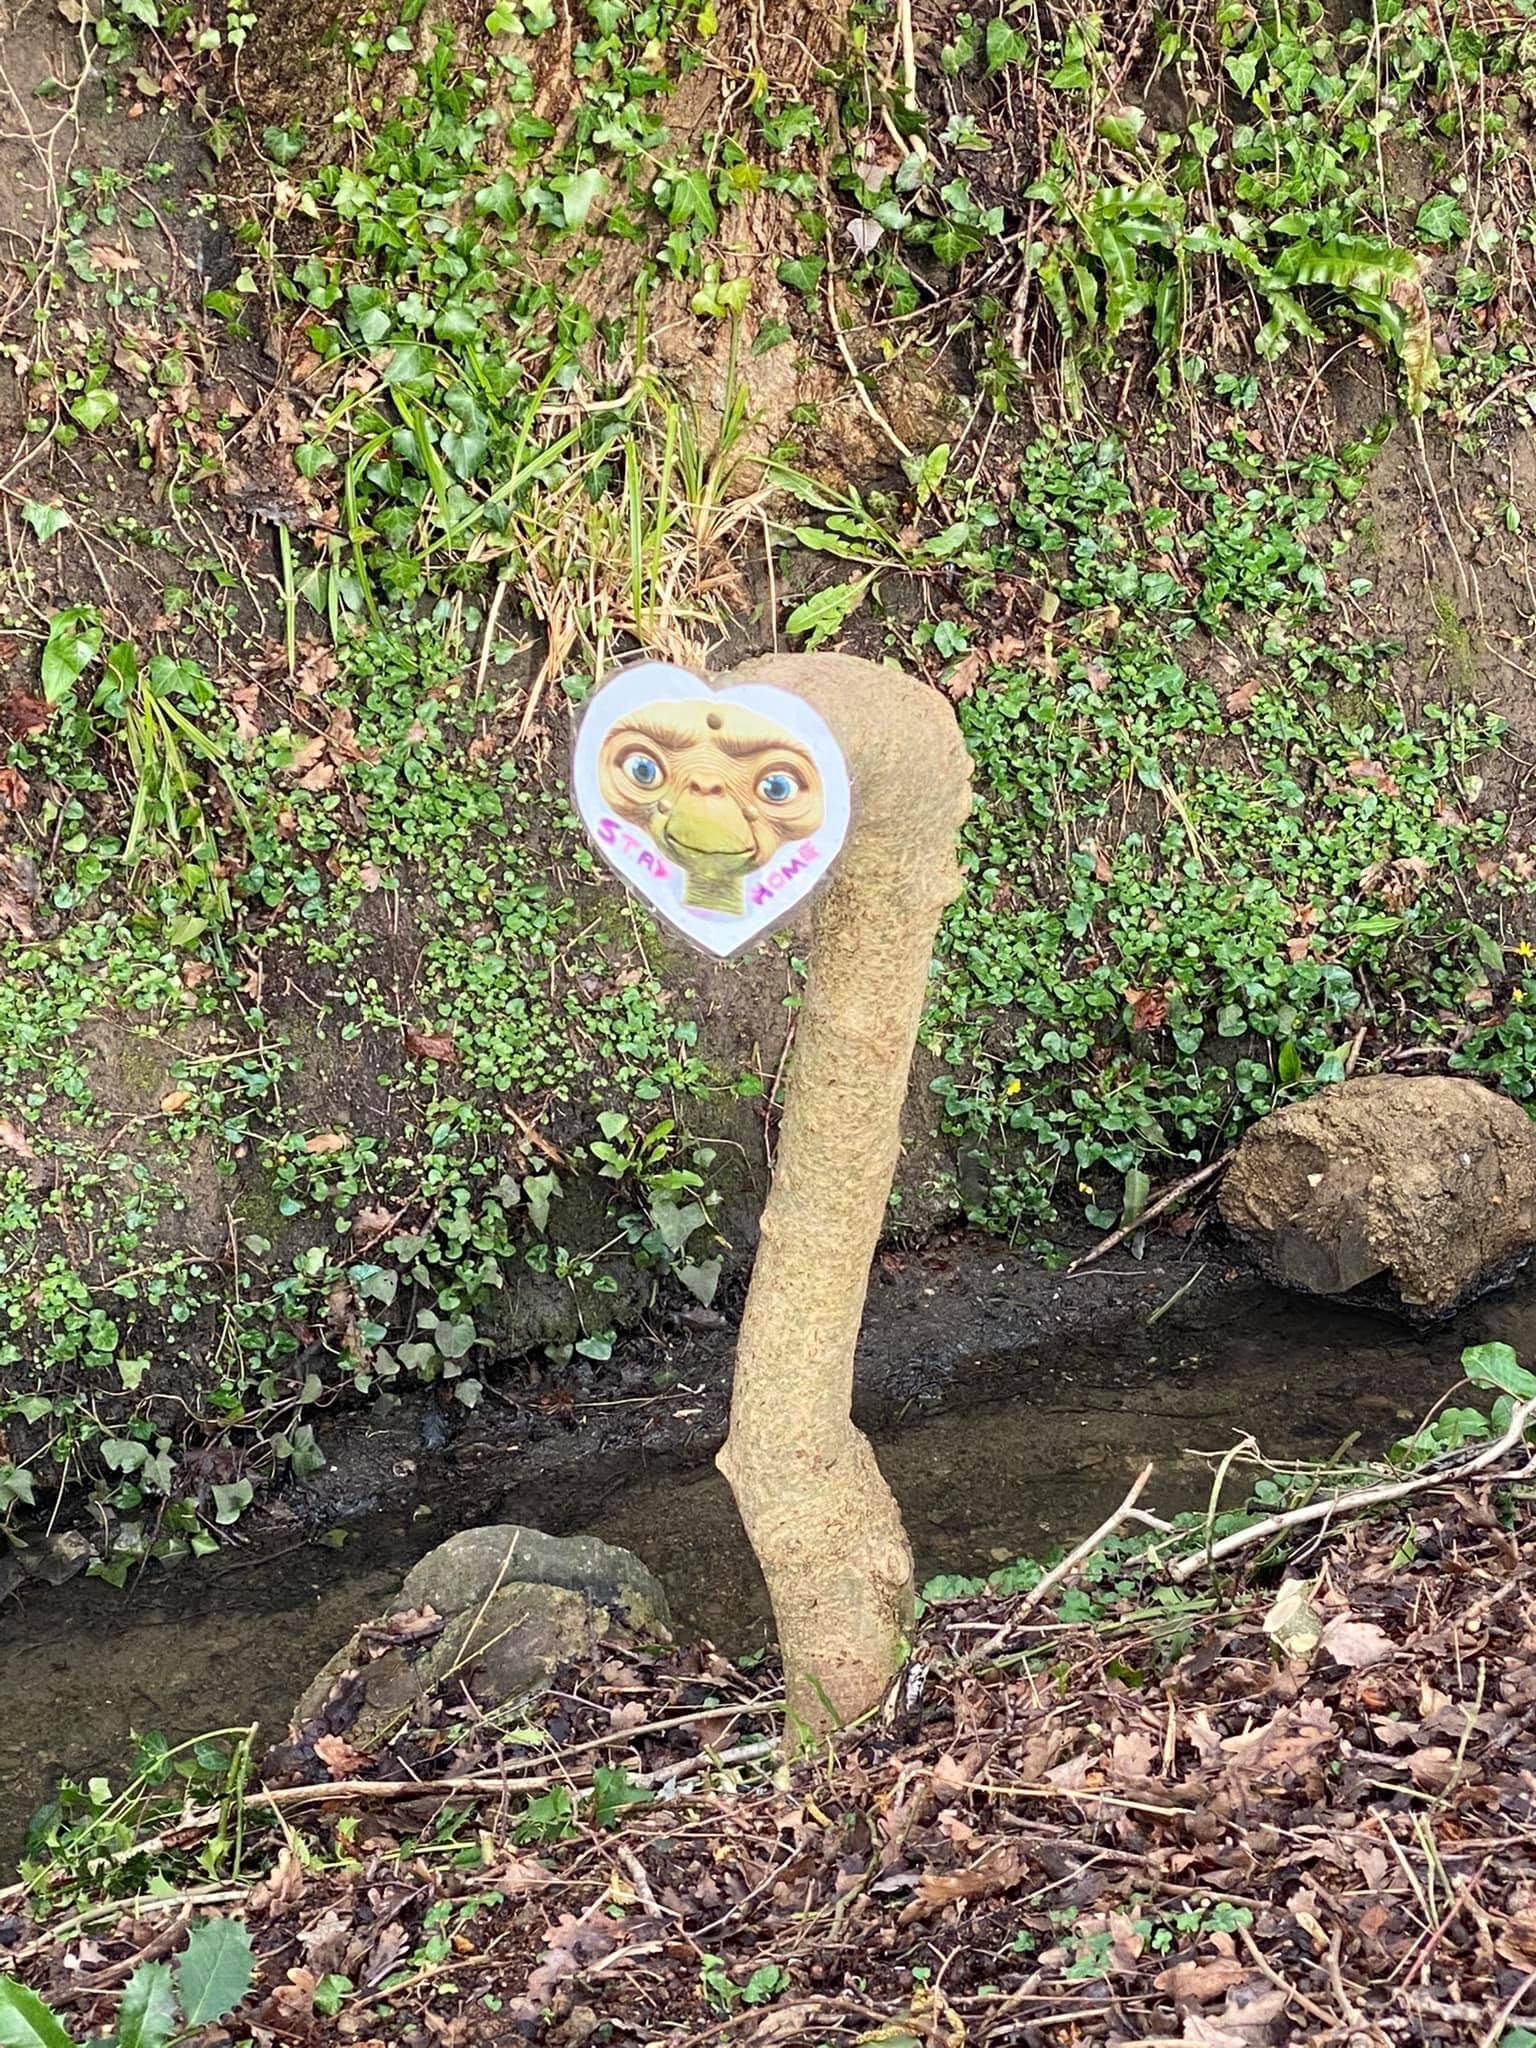 A friend saw this whilst out walking his dog.